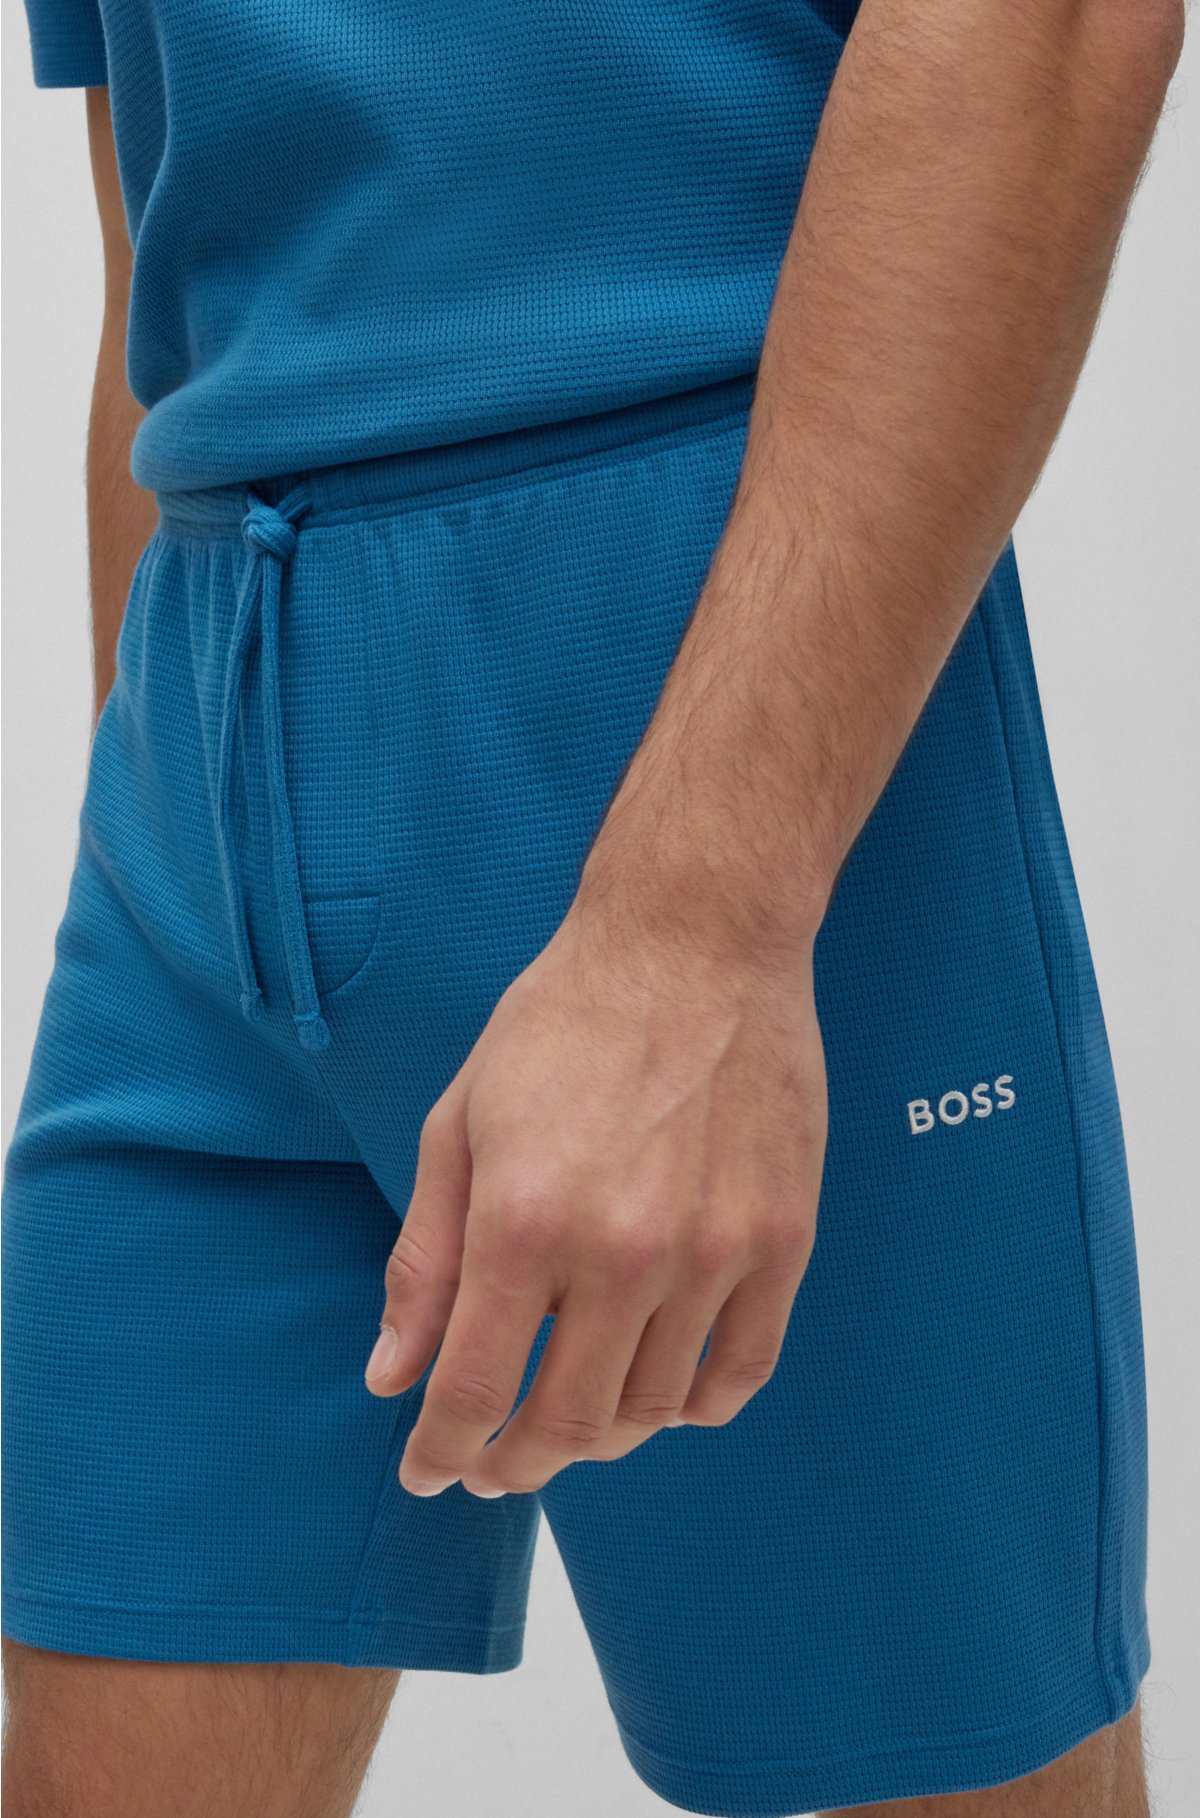 embroidered BOSS Pajama logo - shorts with